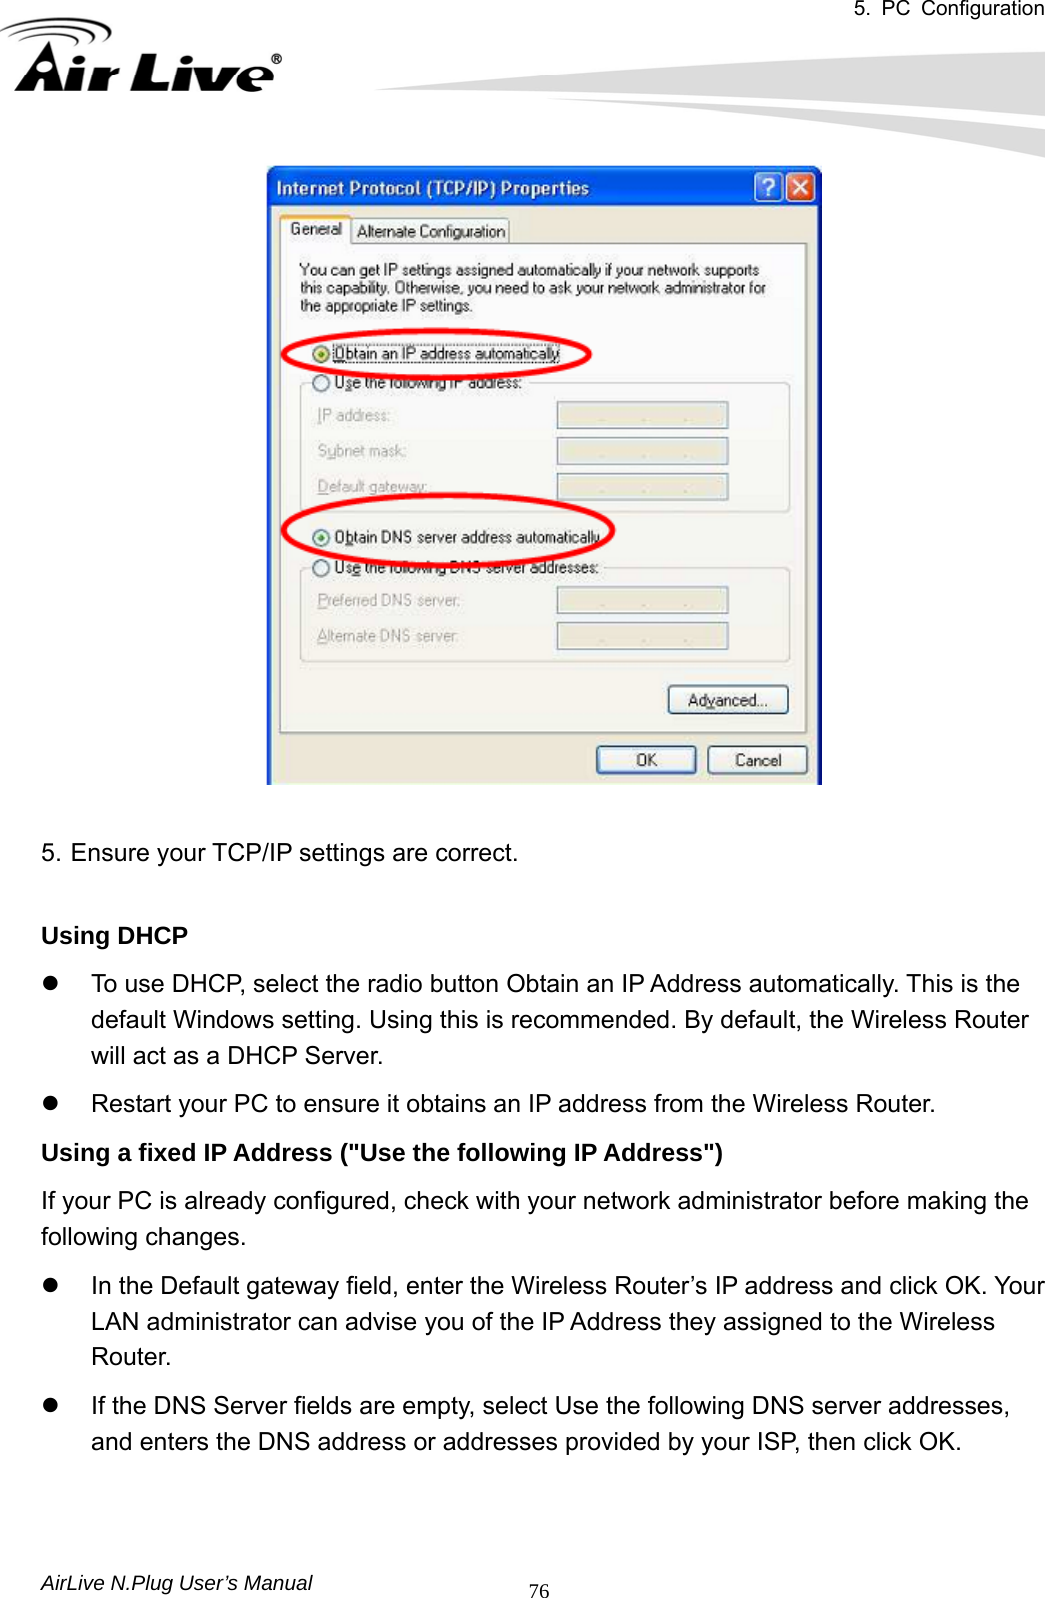 5. PC Configuration       AirLive N.Plug User’s Manual  76  5. Ensure your TCP/IP settings are correct.  Using DHCP   z  To use DHCP, select the radio button Obtain an IP Address automatically. This is the default Windows setting. Using this is recommended. By default, the Wireless Router will act as a DHCP Server.   z  Restart your PC to ensure it obtains an IP address from the Wireless Router.   Using a fixed IP Address (&quot;Use the following IP Address&quot;)  If your PC is already configured, check with your network administrator before making the following changes.   z  In the Default gateway field, enter the Wireless Router’s IP address and click OK. Your LAN administrator can advise you of the IP Address they assigned to the Wireless Router.  z  If the DNS Server fields are empty, select Use the following DNS server addresses, and enters the DNS address or addresses provided by your ISP, then click OK.     